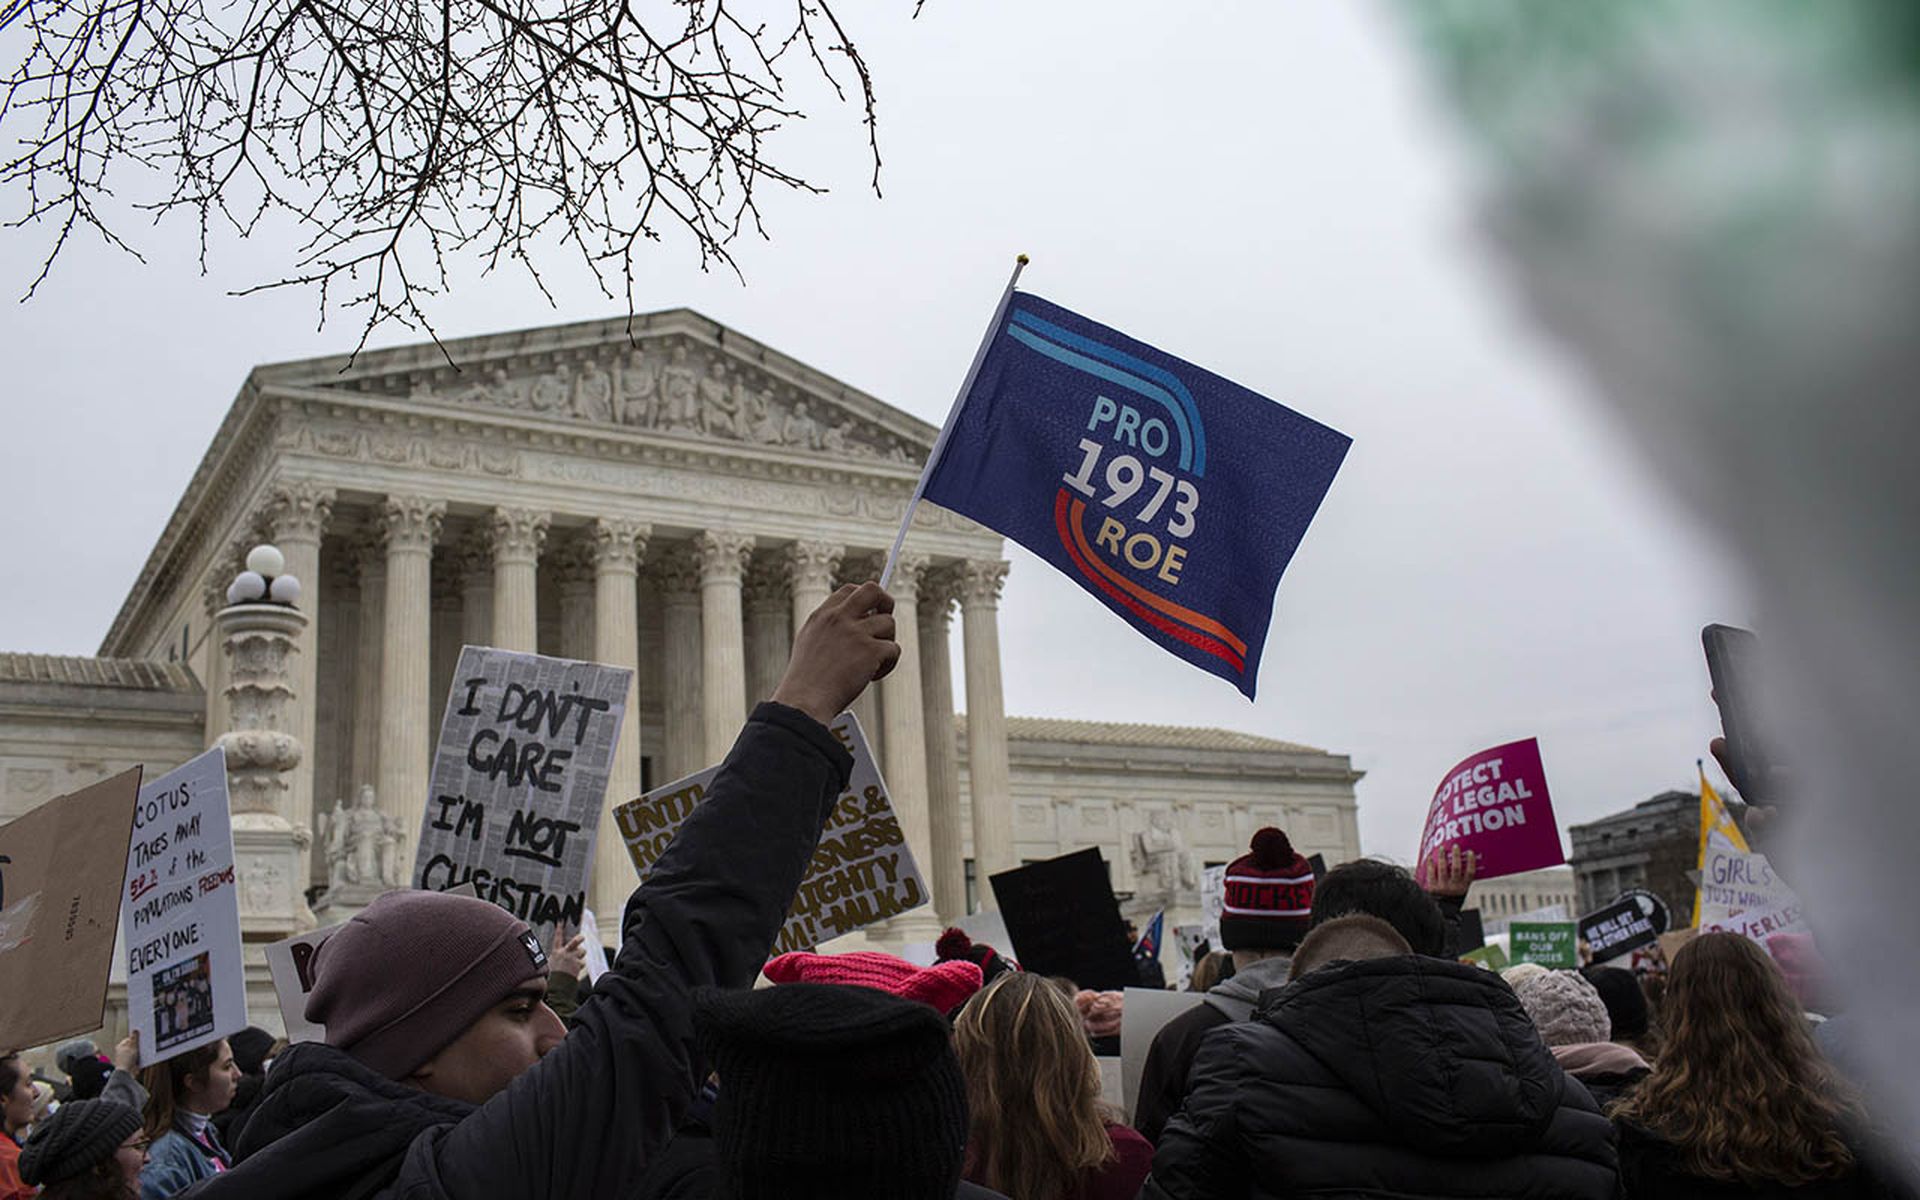 A person holds a flag that reads "Pro Roe 1973" in front of the US Supreme Court.